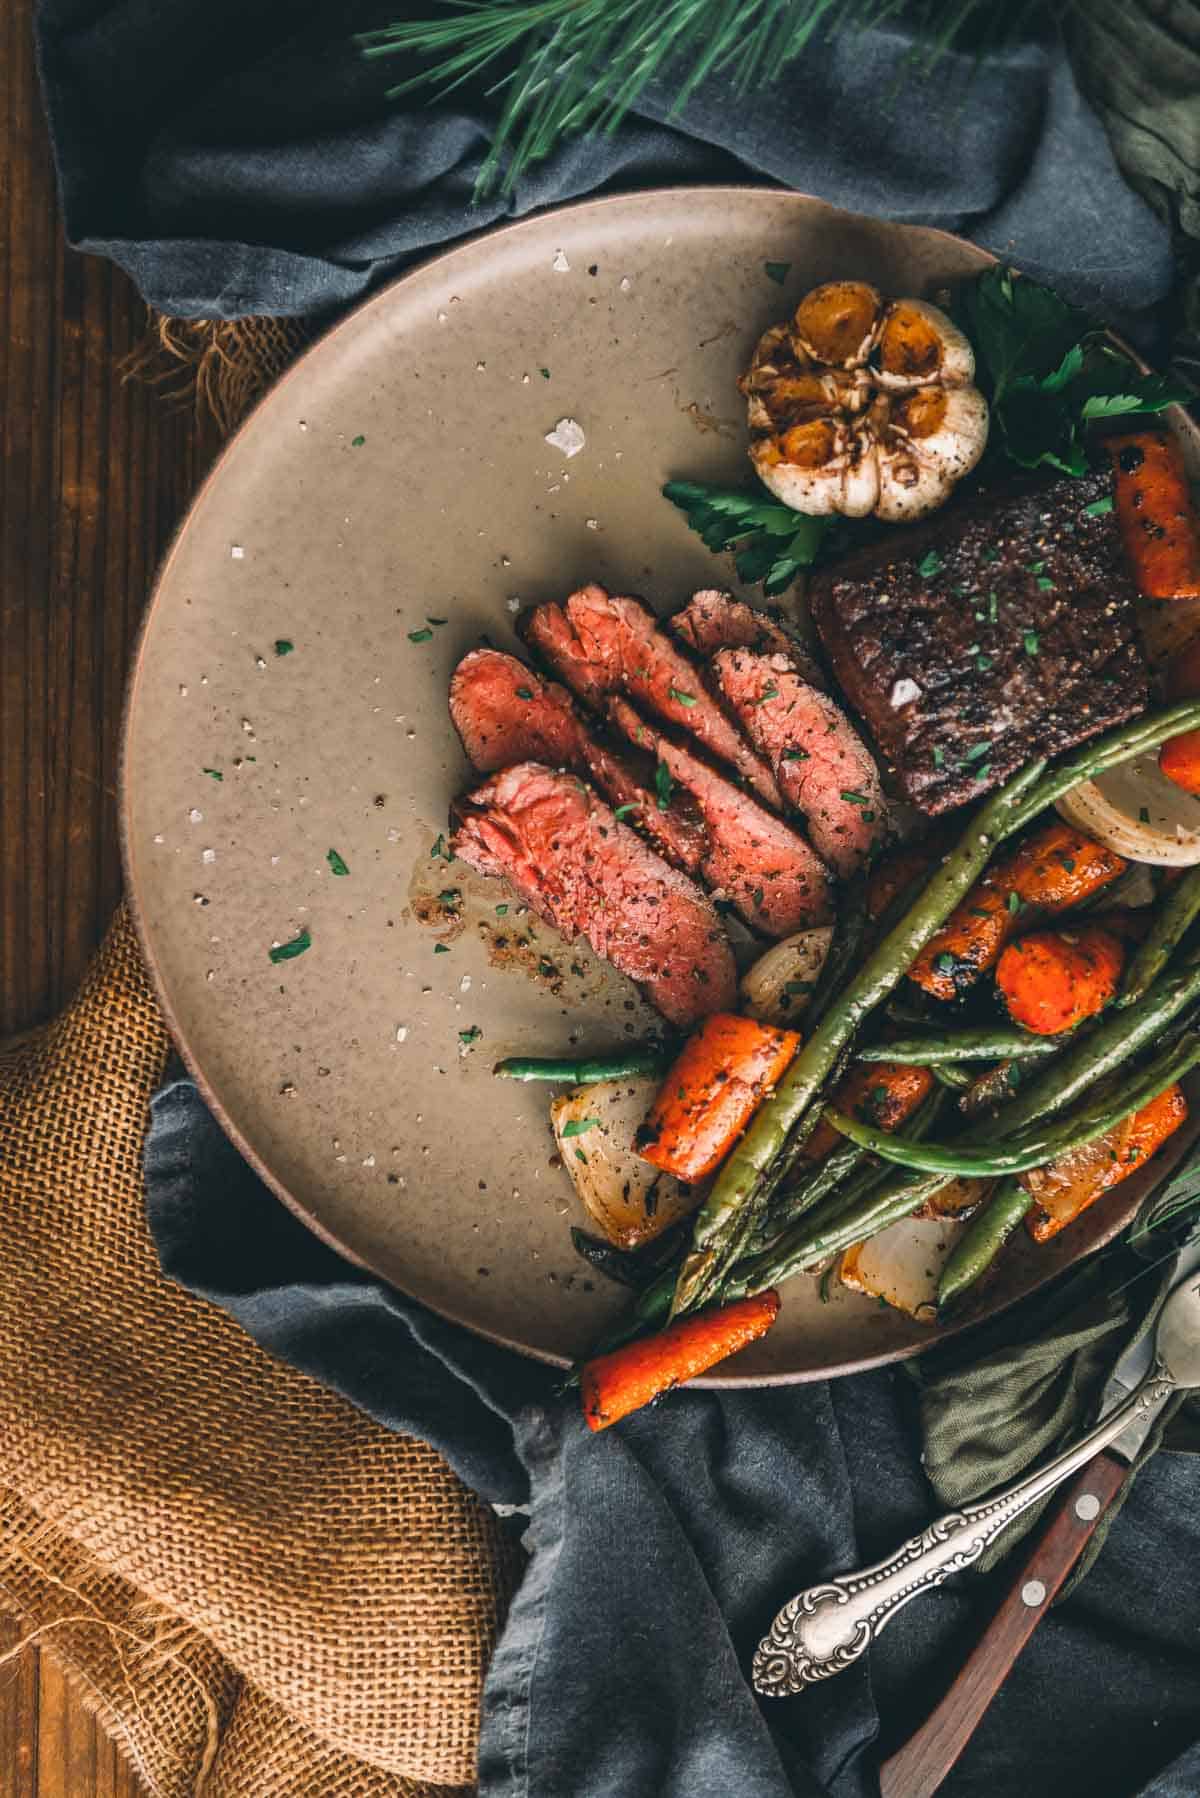 Steak and vegetables on a plate.